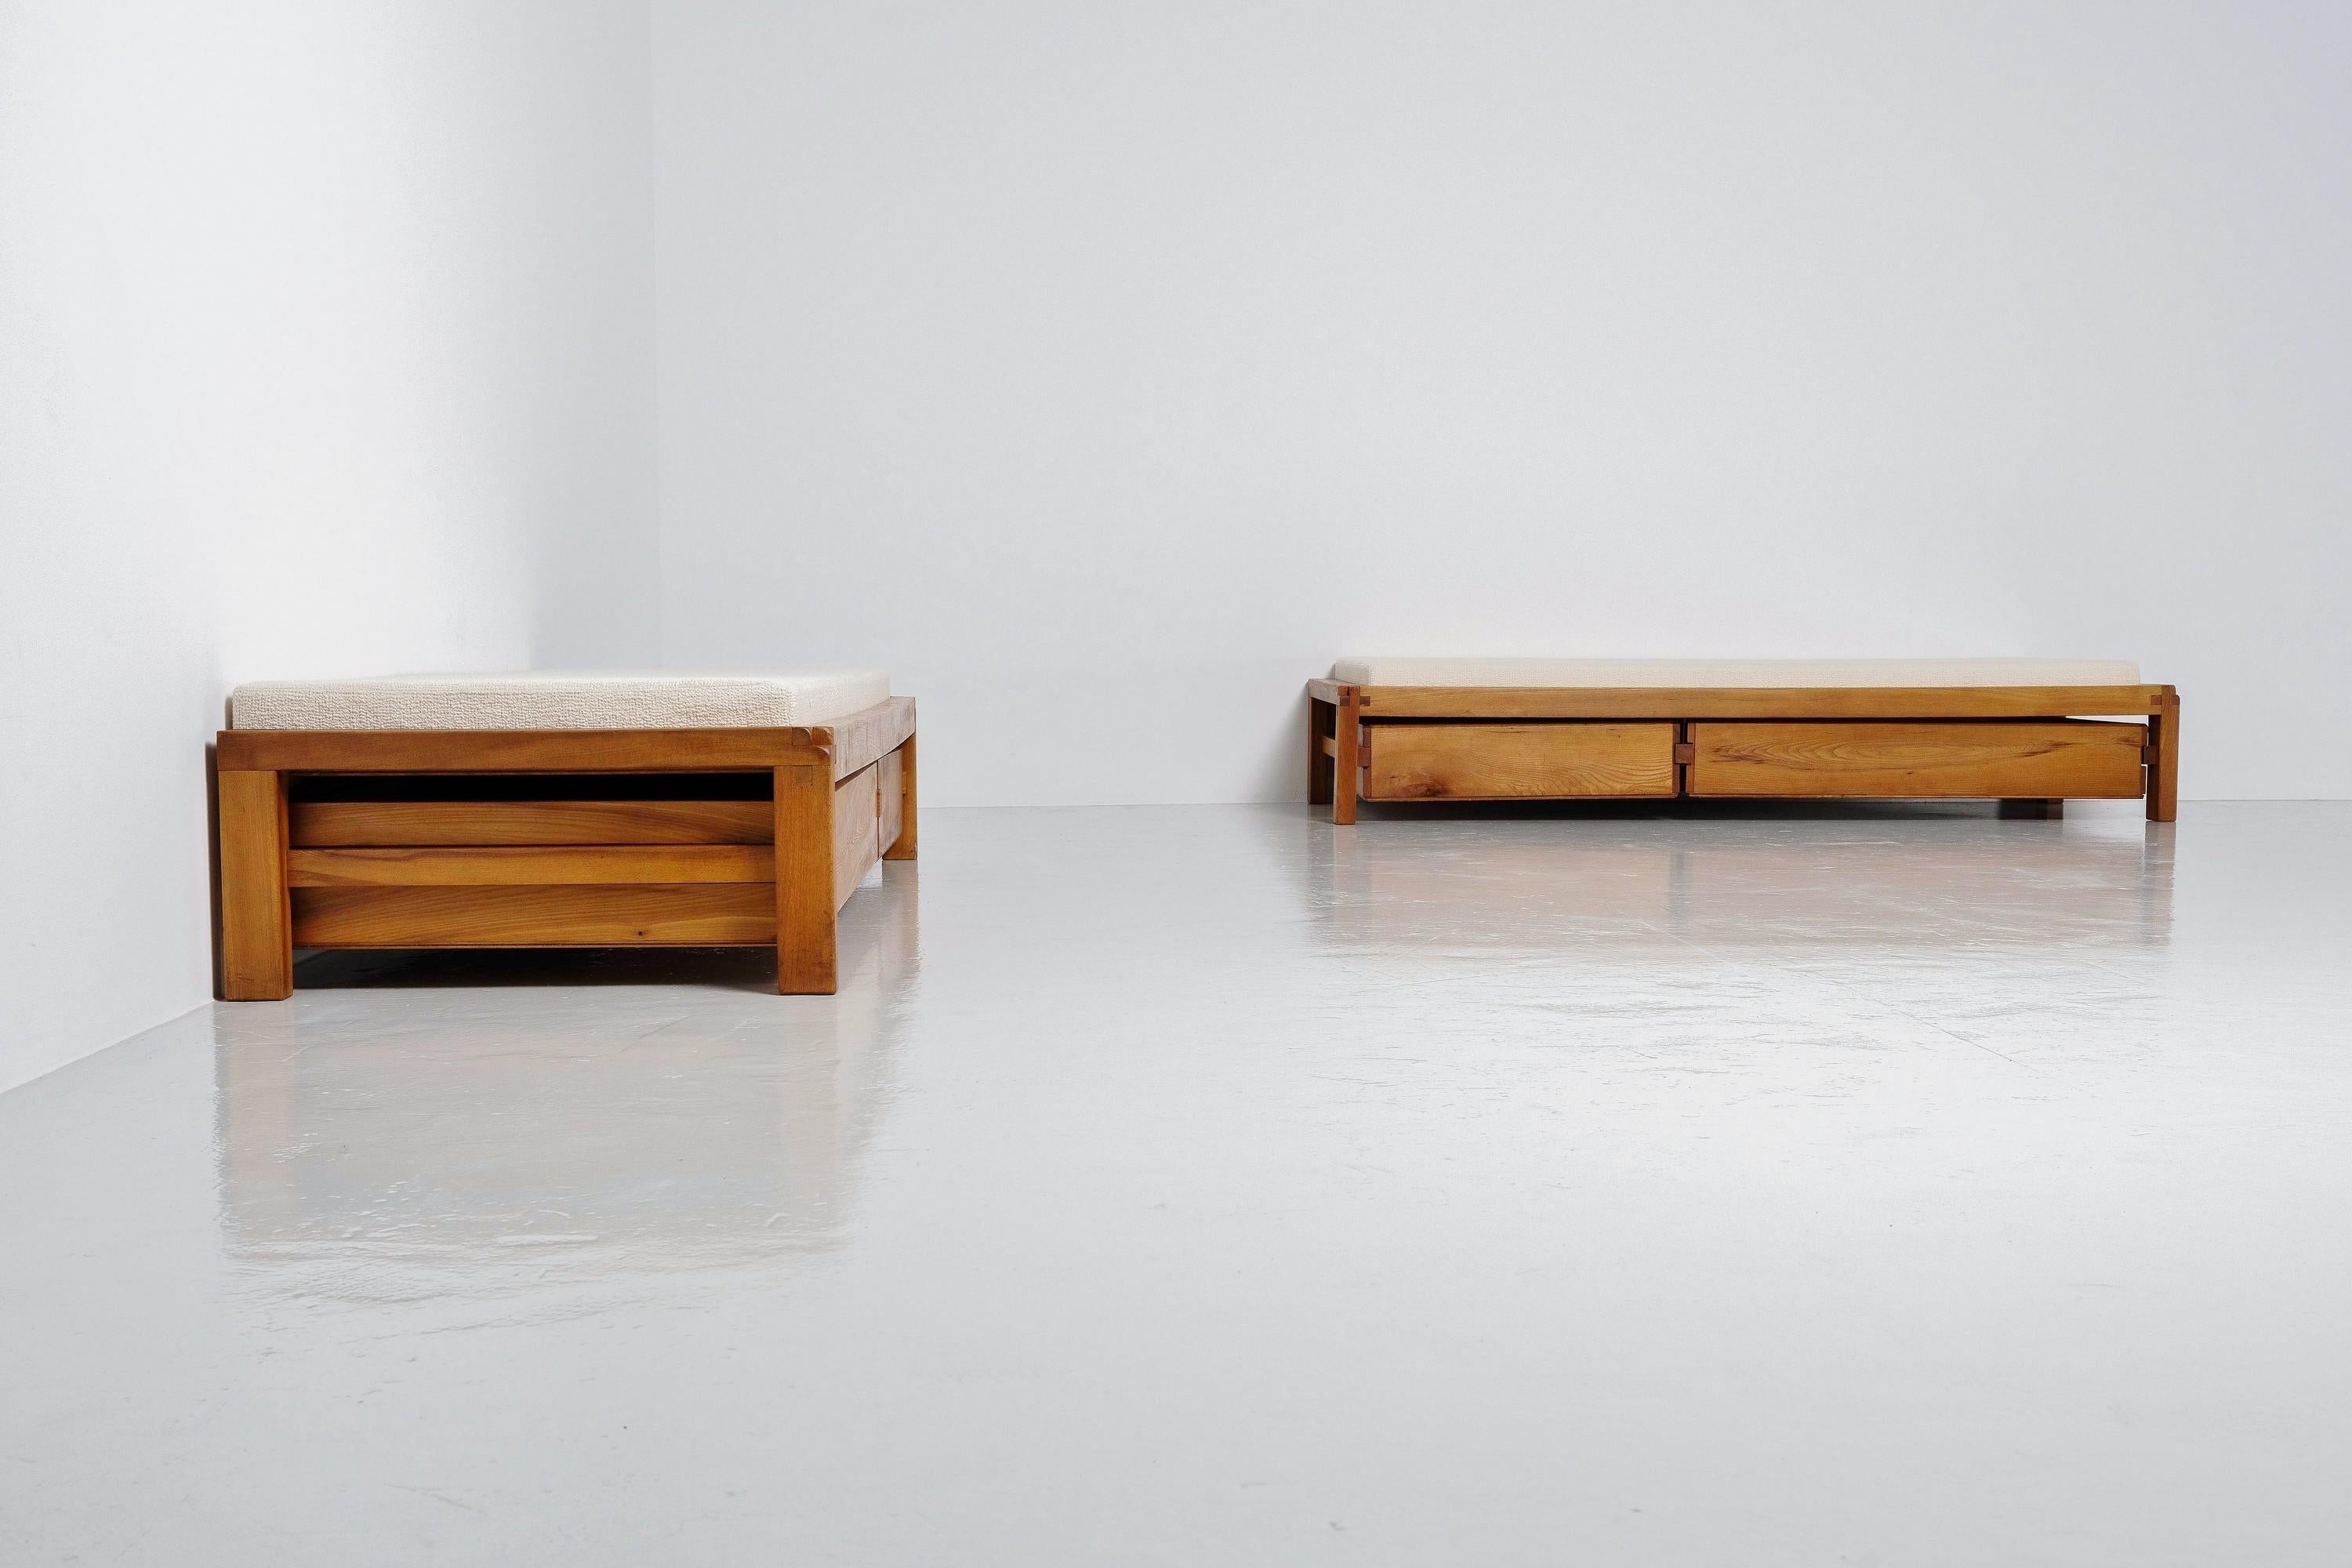 Very distinctive and clean pair of 'Model L03' daybeds designed by Pierre Chapo and manufactured in 1963 in his own workshop. These beds are in a very good and original condition, and have solid elm wooden frames in which his trademark joinery is